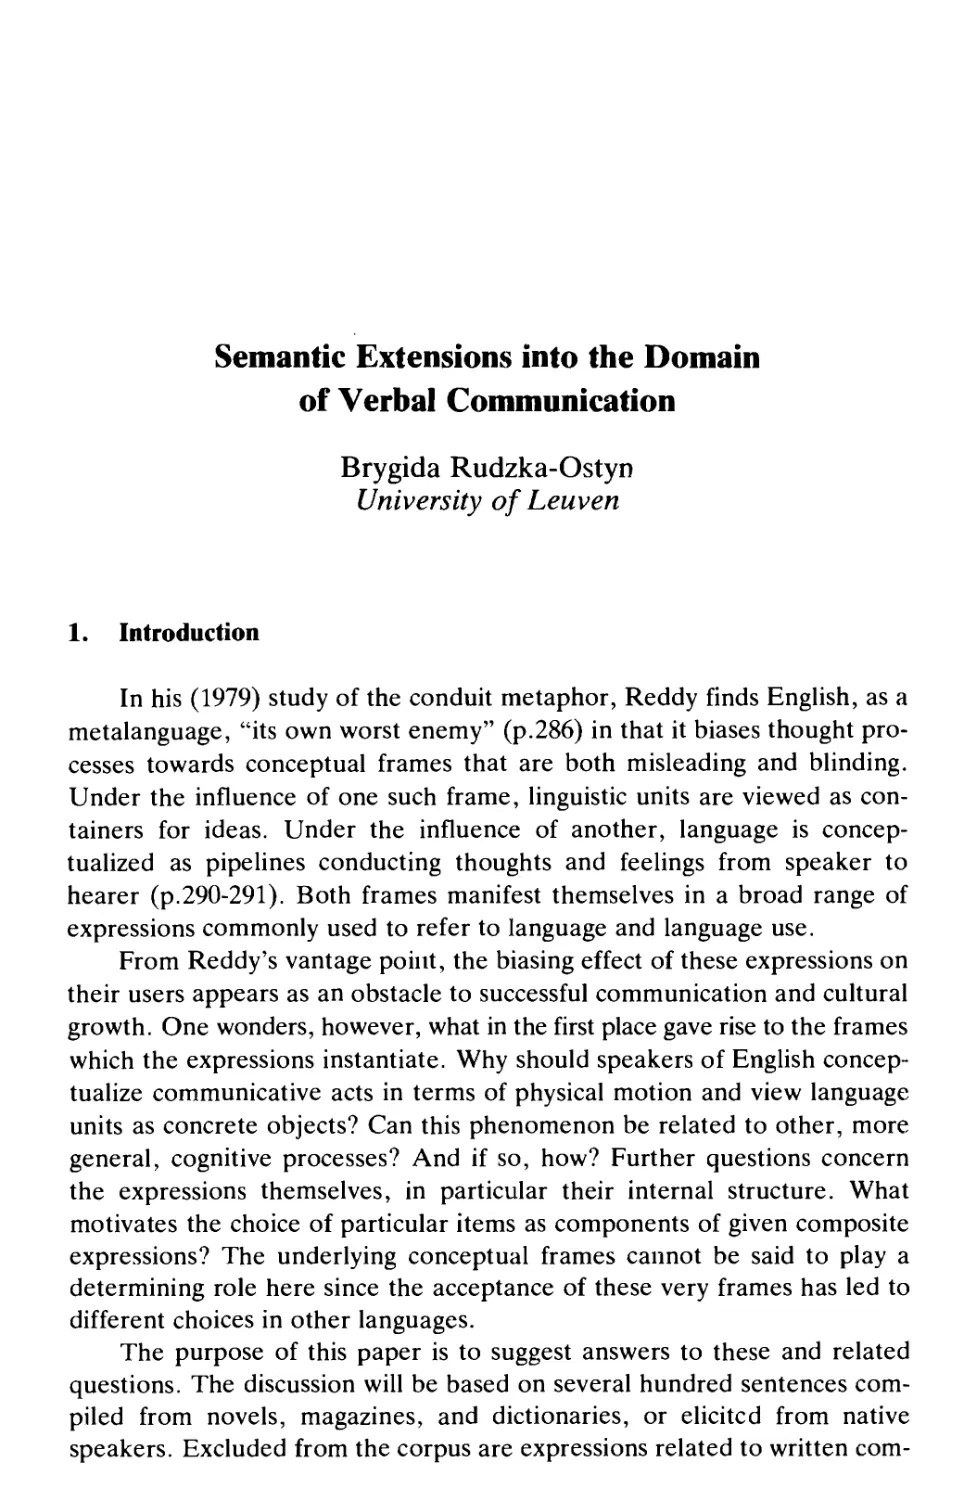 Semantic Extensions into the Domain of Verbal Communication